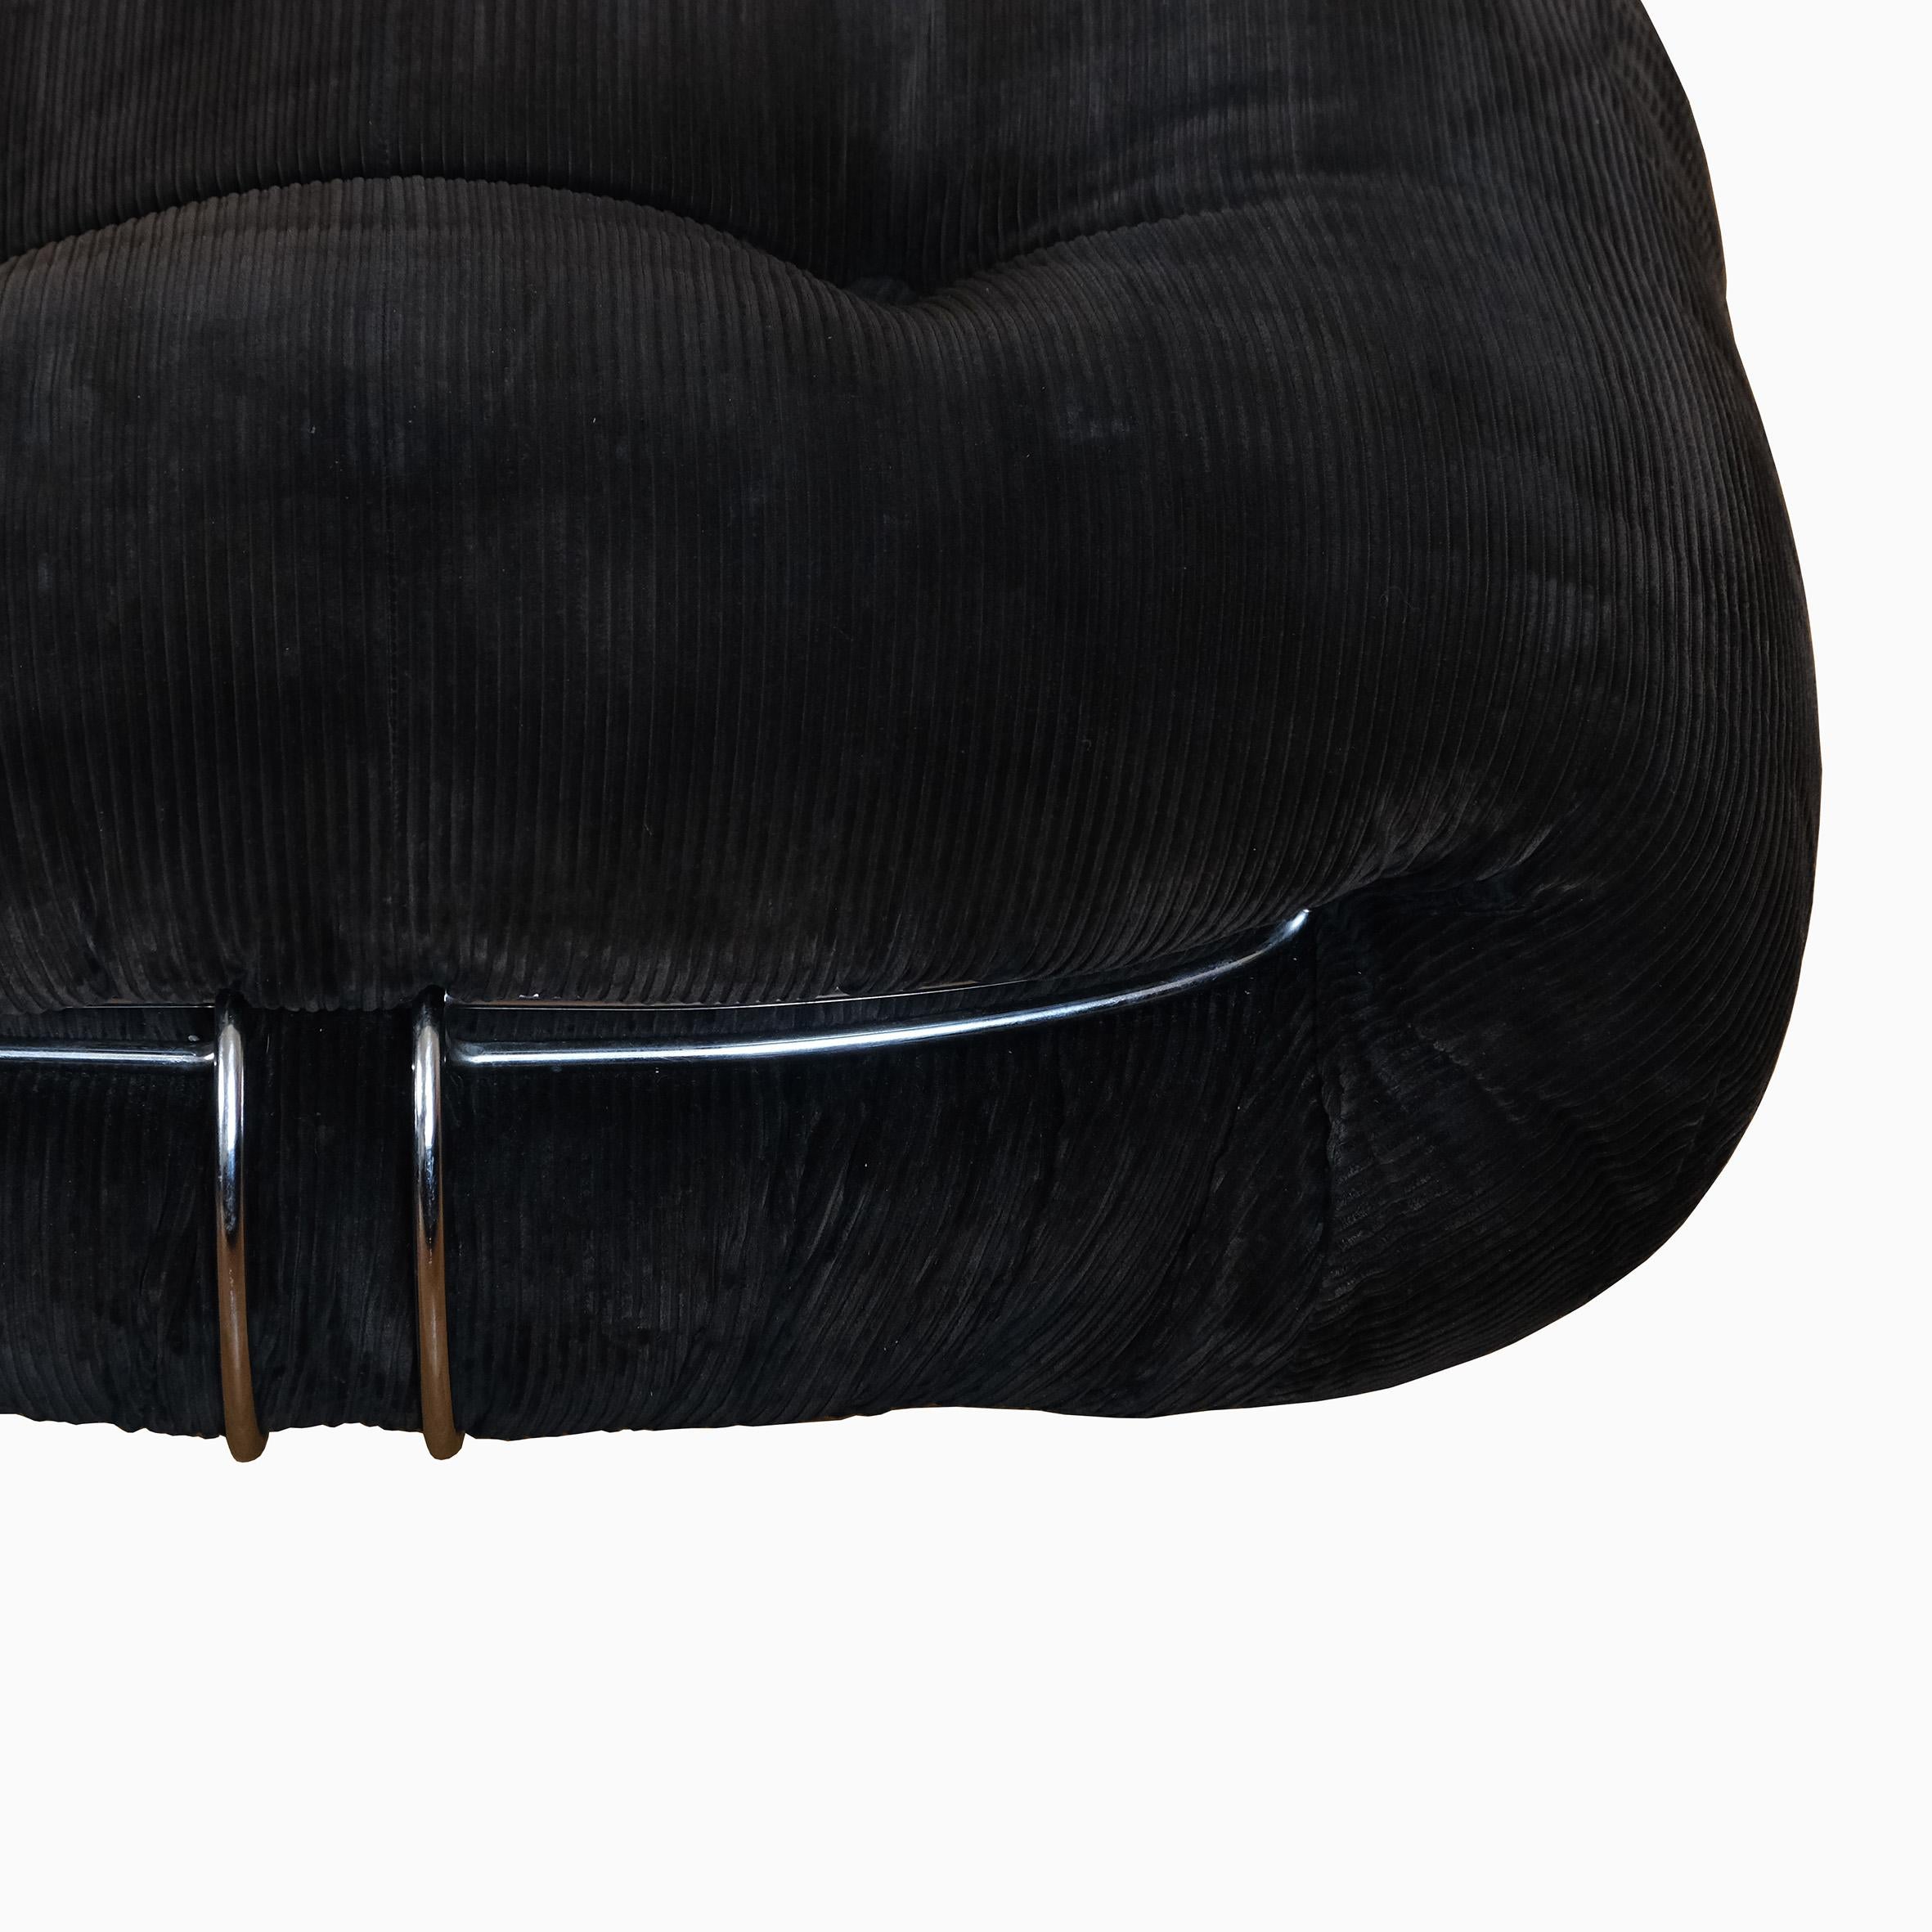 Afra & Tobia Scarpa, Soriana Ottoman, Cassina, 1970s In Good Condition For Sale In Paris, FR